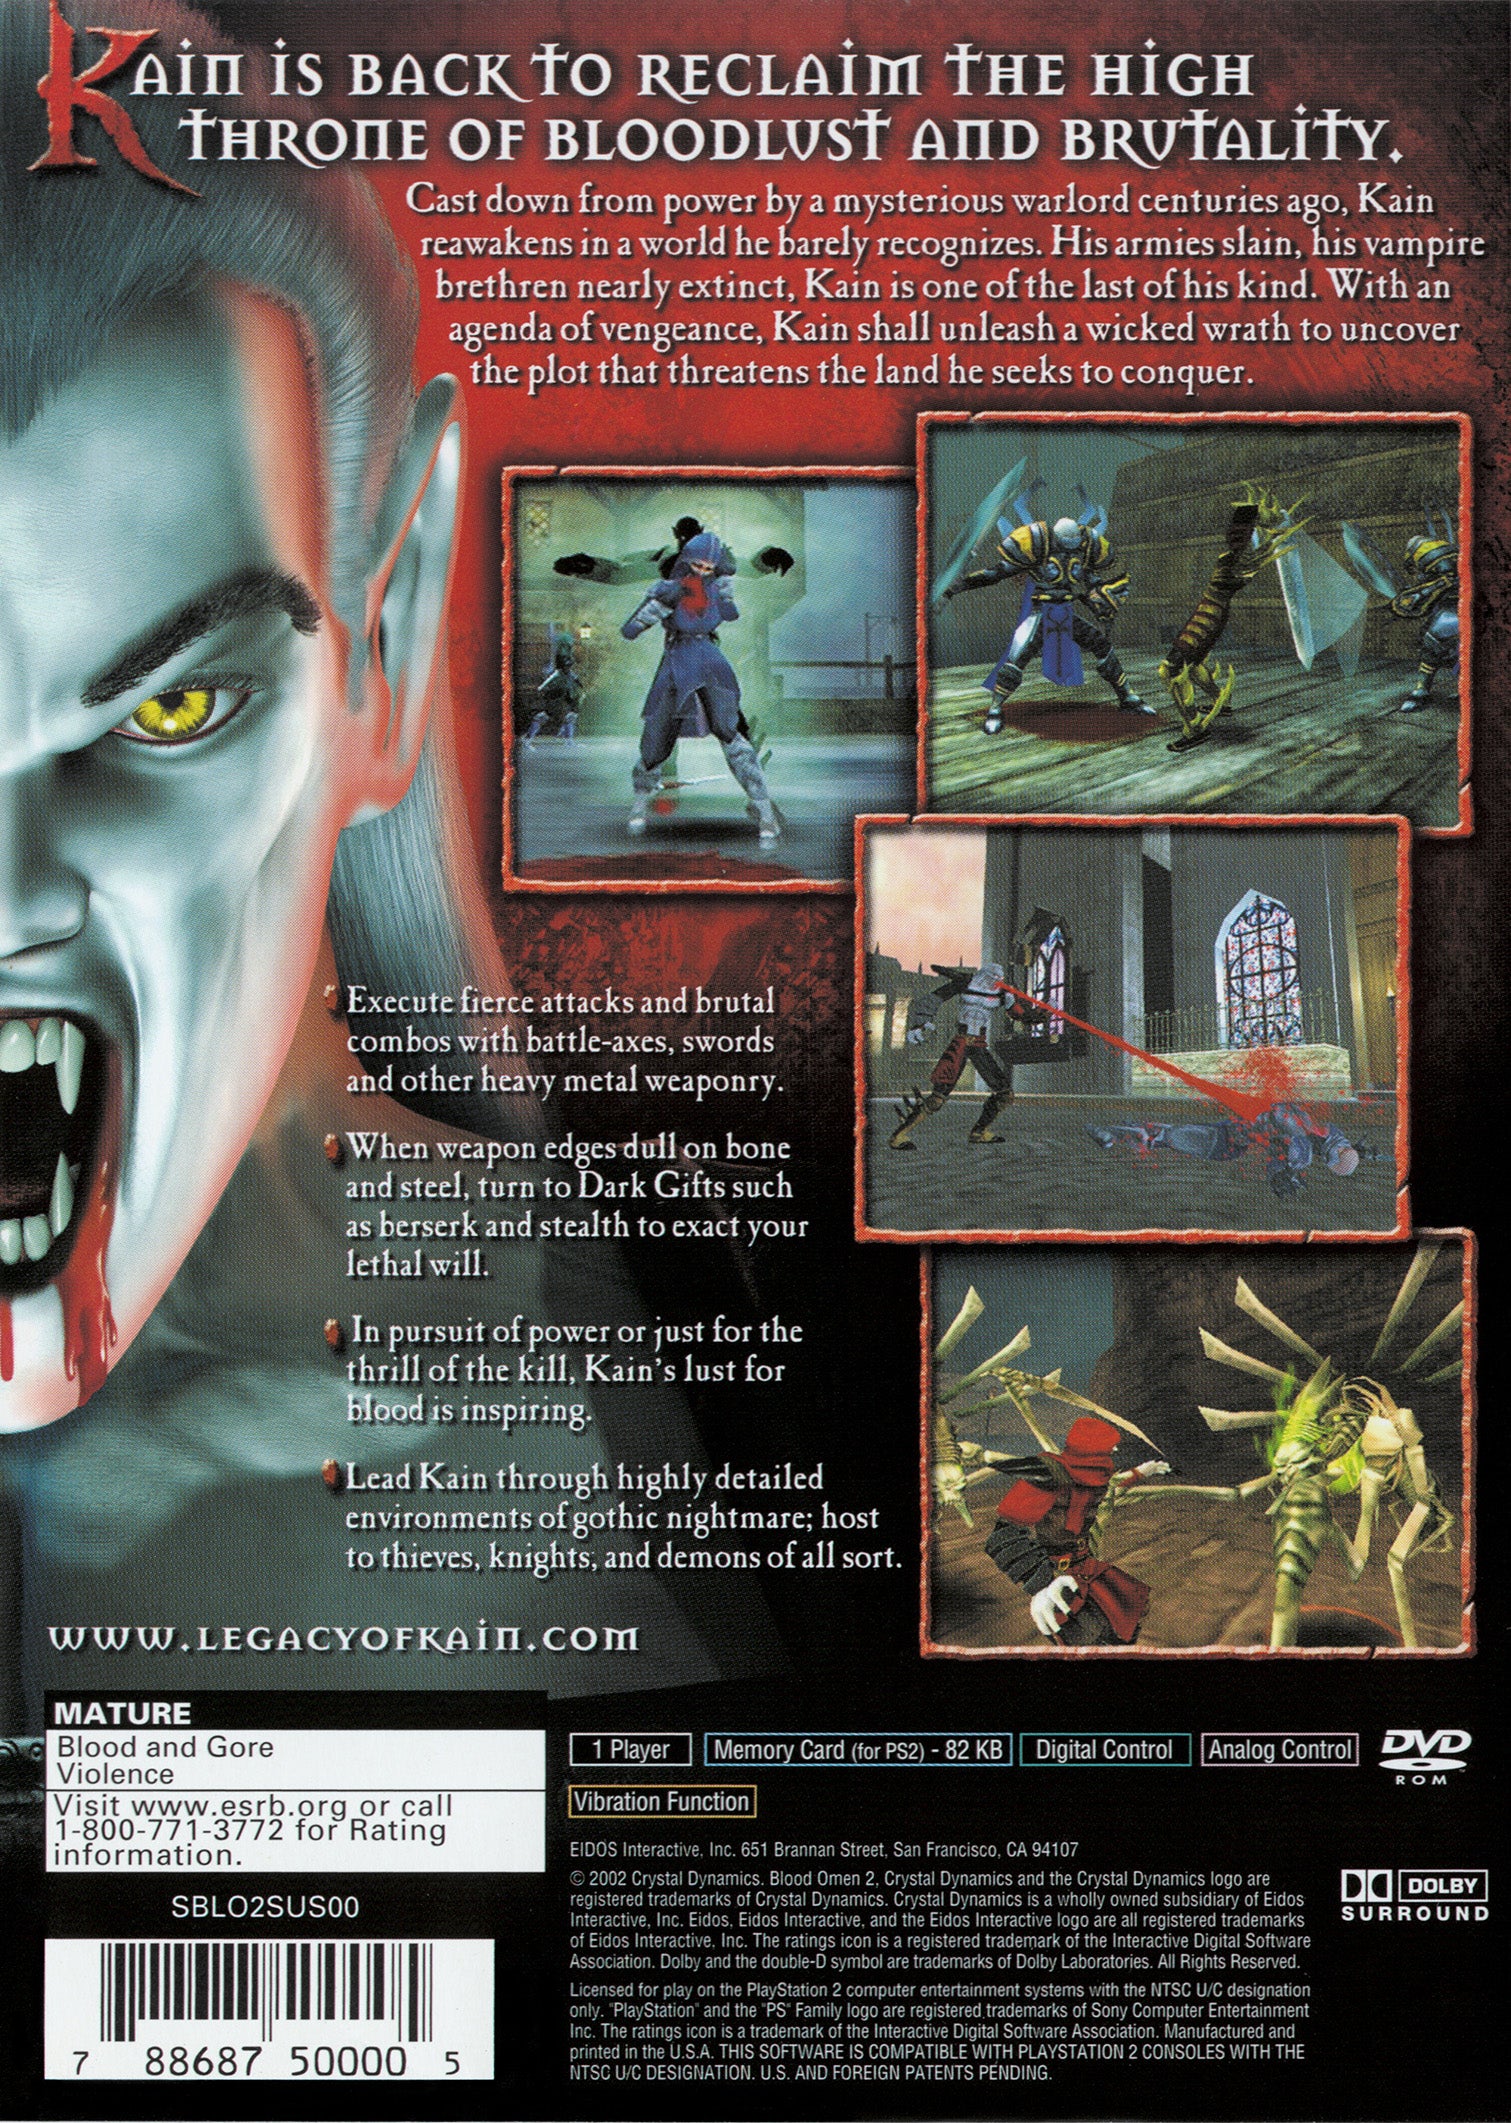 The Legacy of Kain Series: Blood Omen 2 - PlayStation 2 (PS2) Game